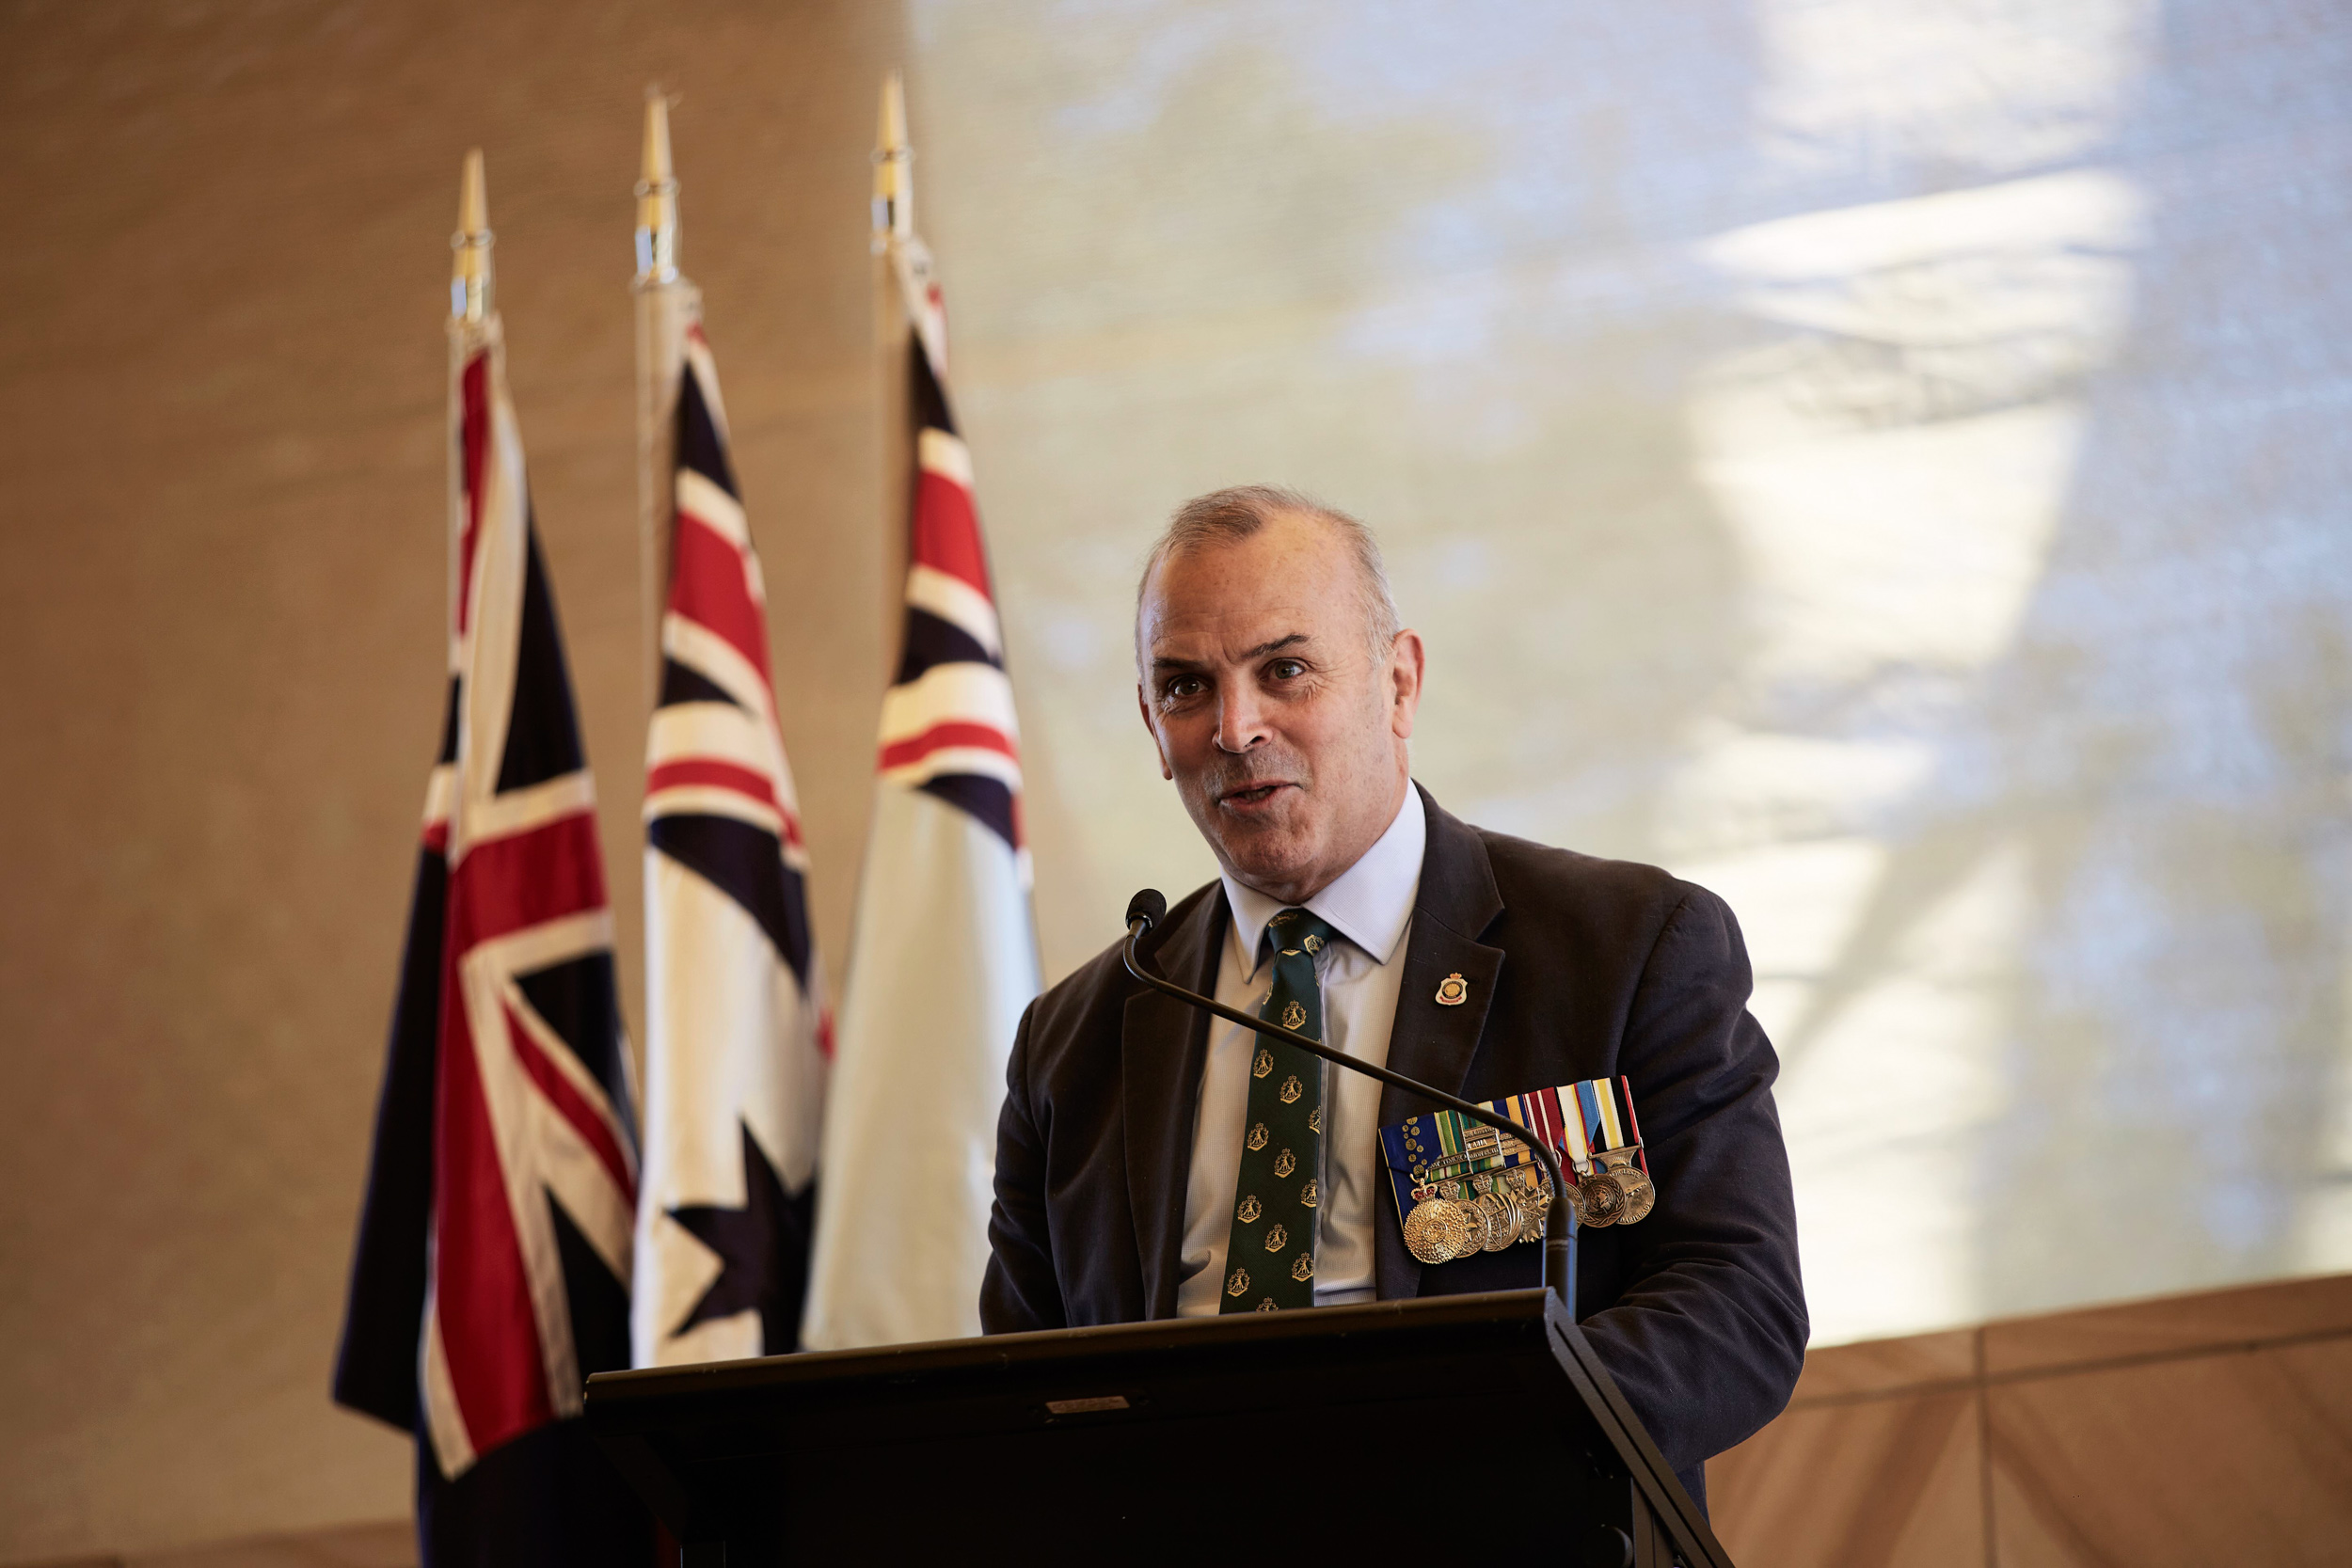 RSLL_MSL_Web_278 | RSL LifeCare - provide care and service to war veterans, retirement villages and accommodation, aged care services and assisted living